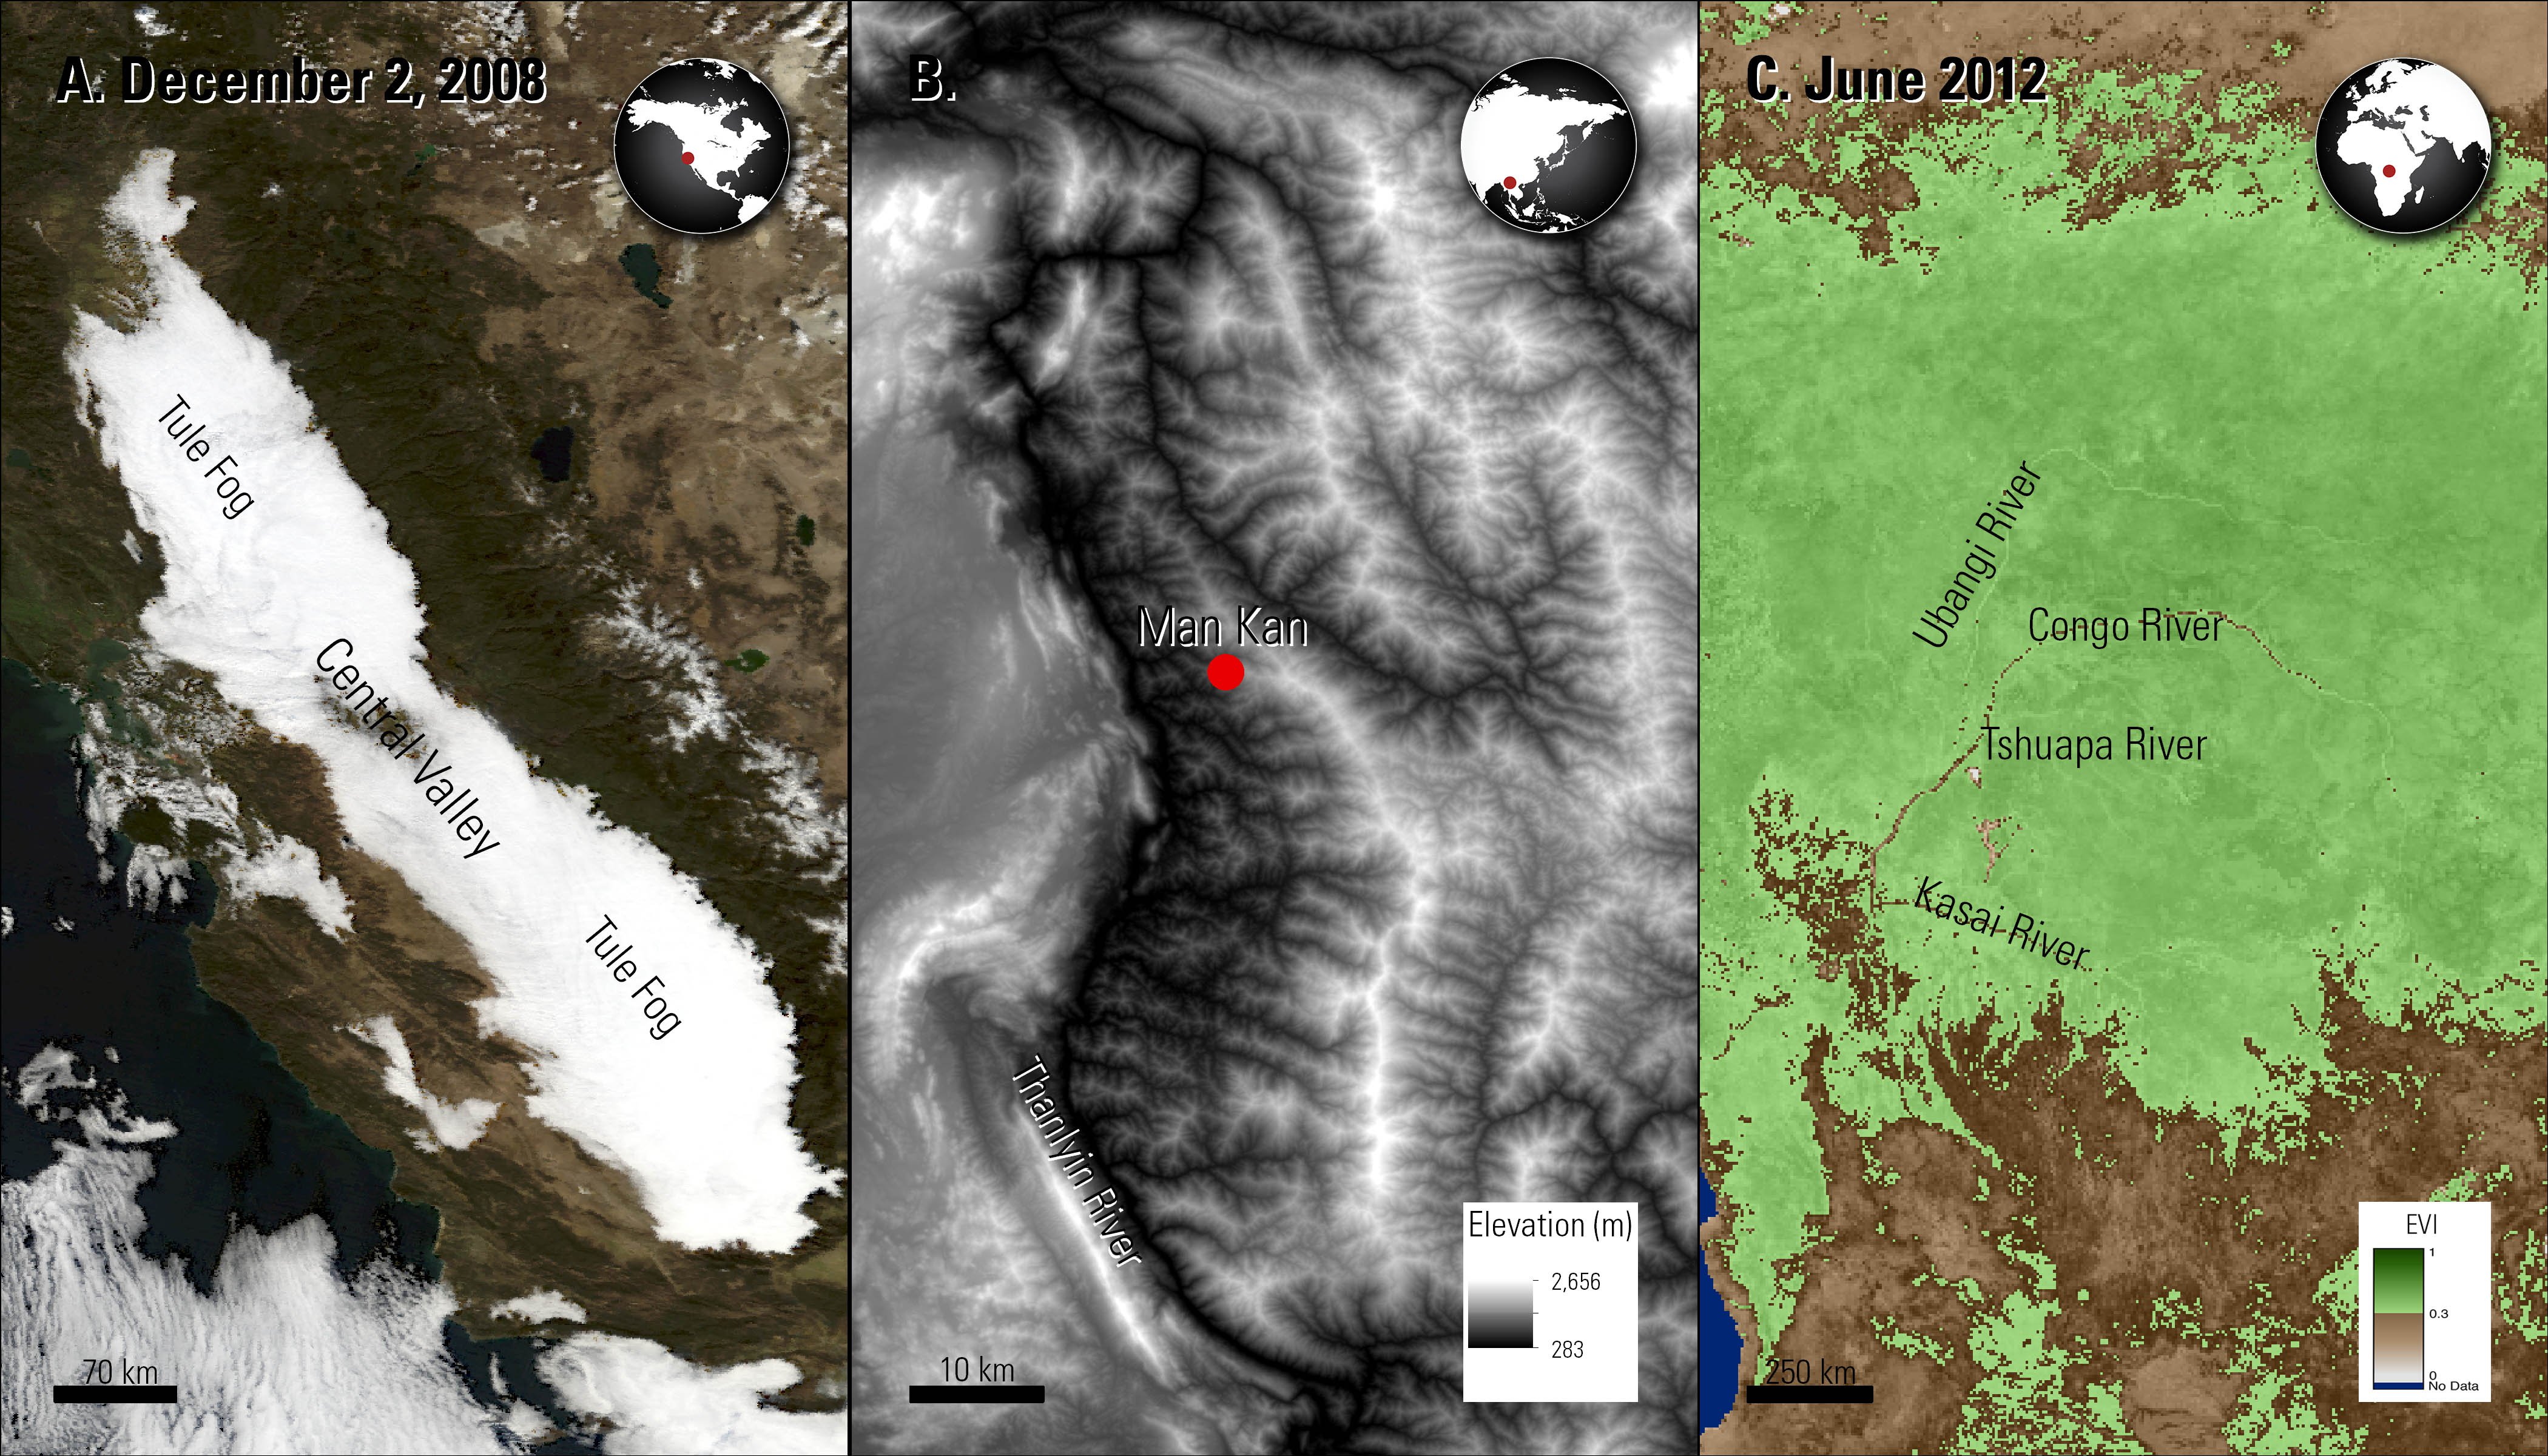 Three images showing data from the story. The left image shows fog in California, United States, the center image shows elevation over Man Kan, Myanmar, and the right image shows EVI data over the Congo Basin in Africa.